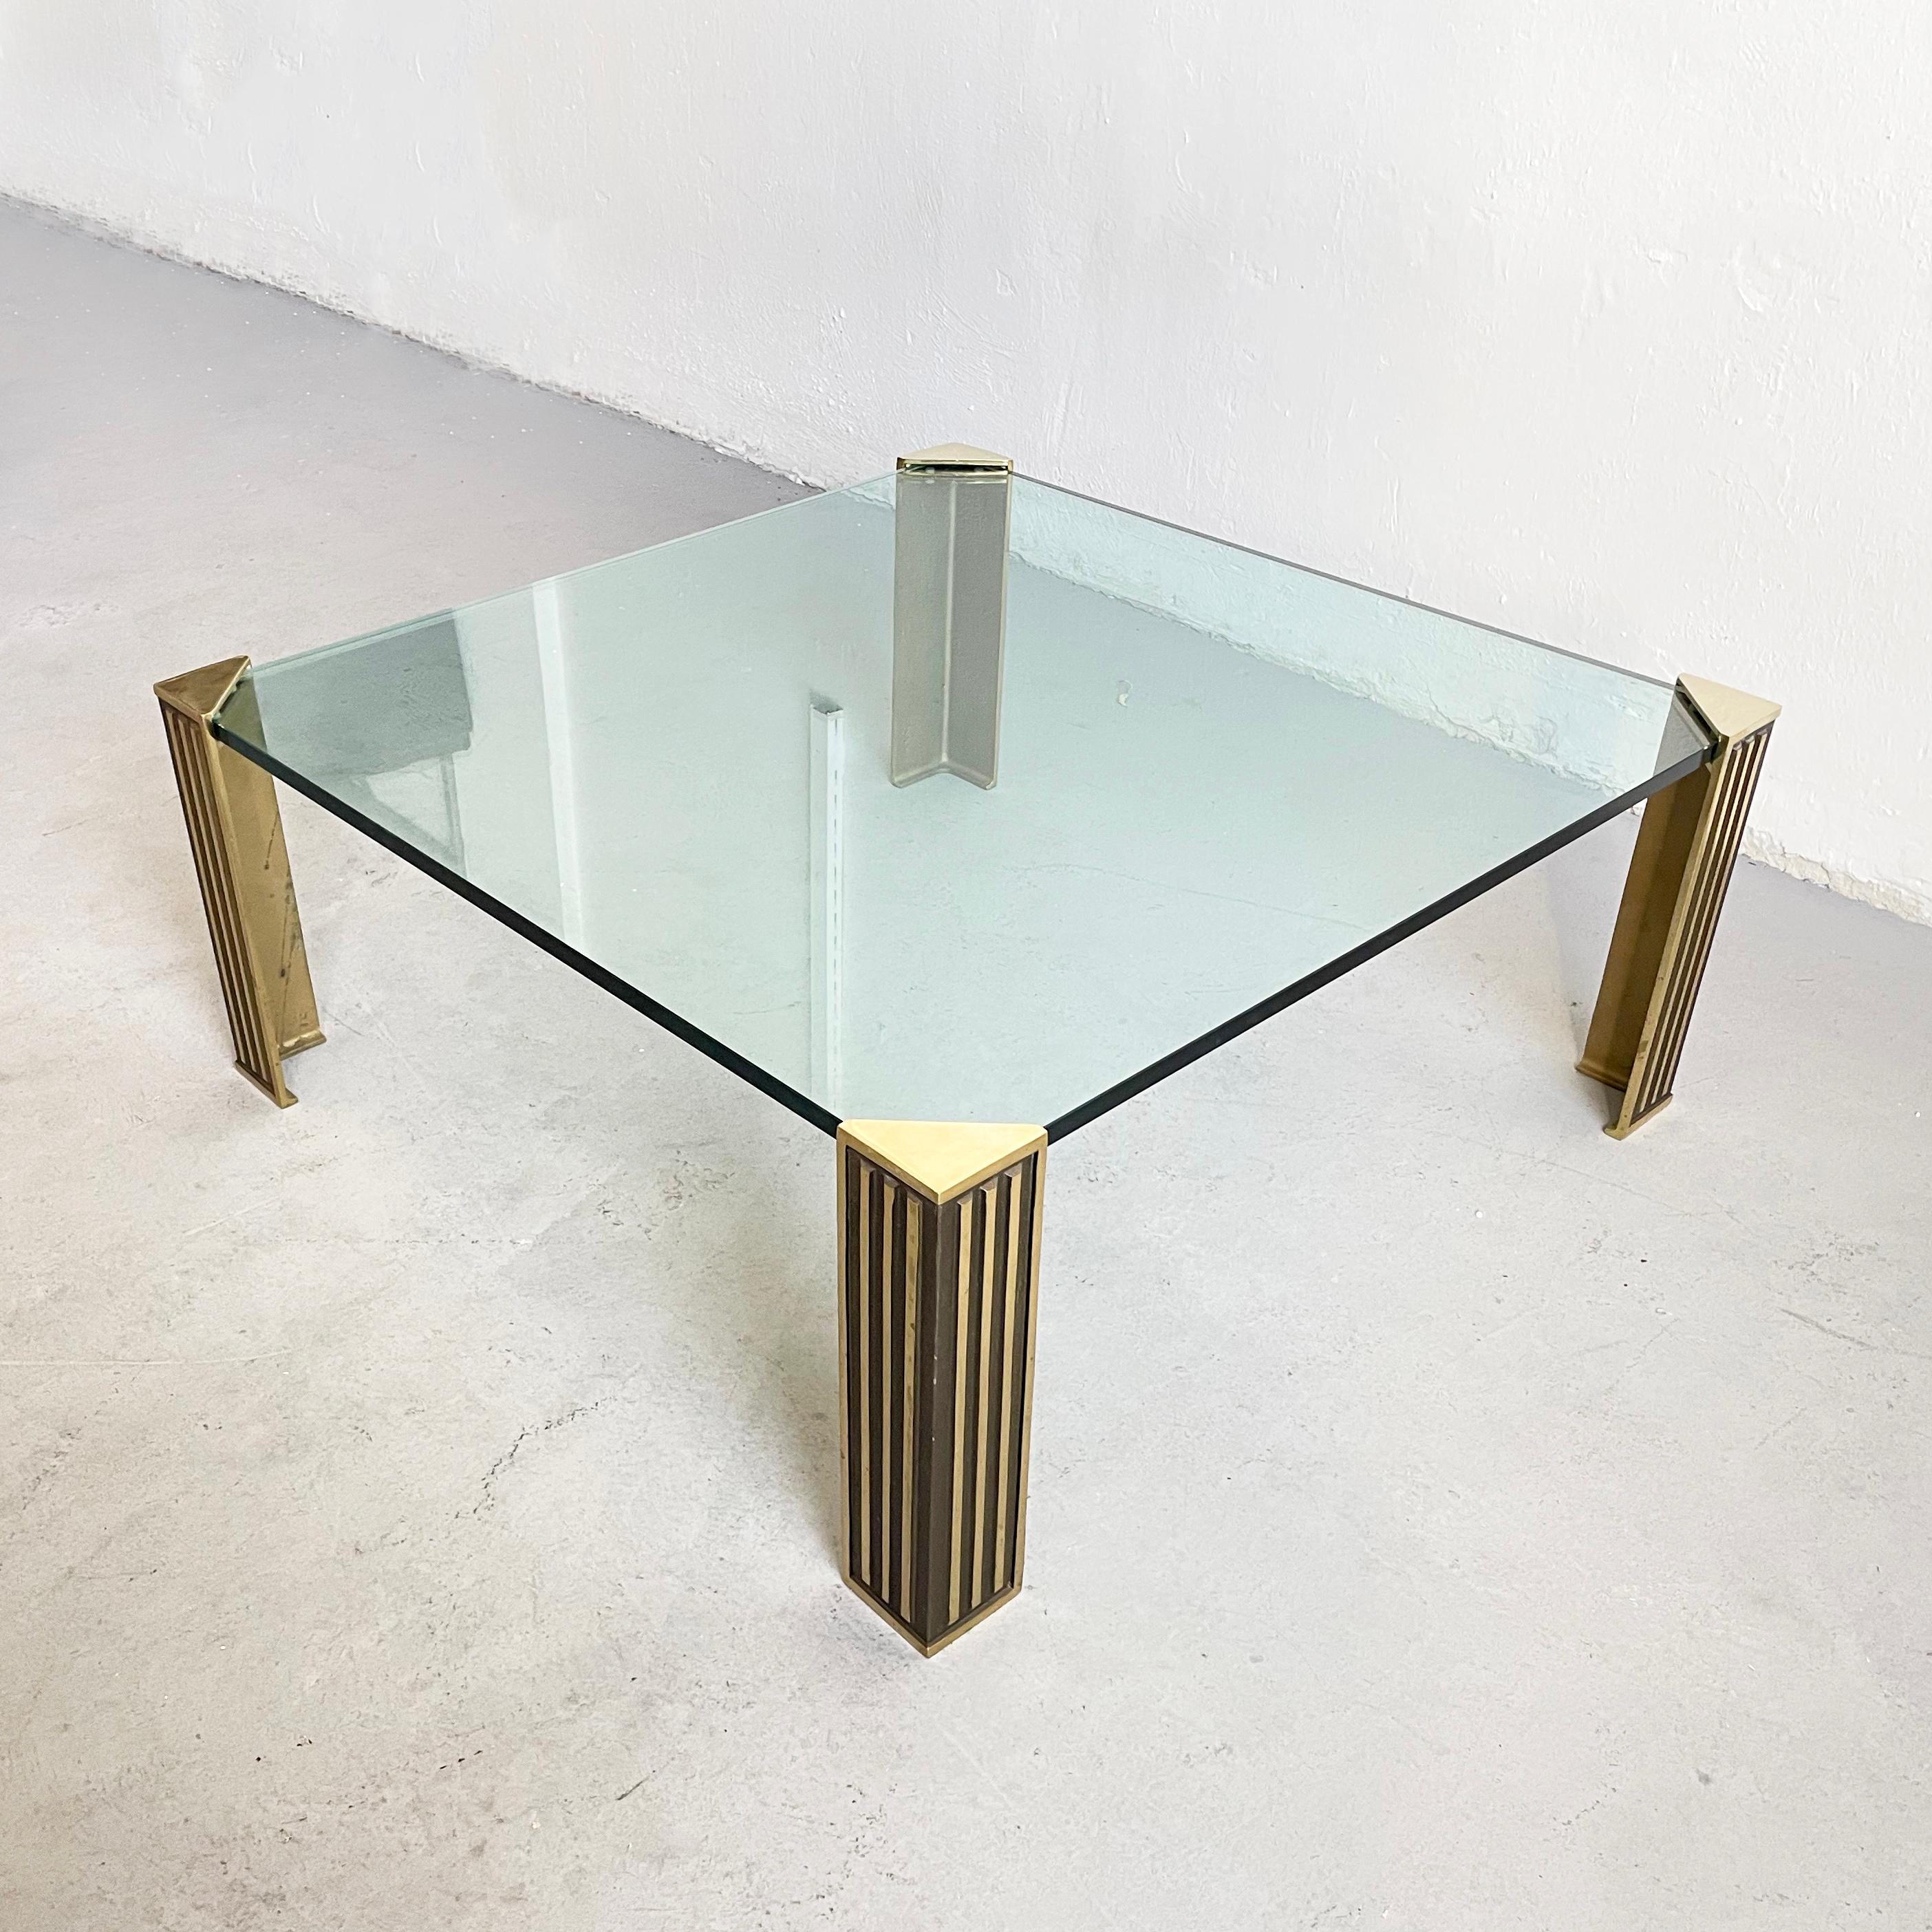 Late 20th Century Hollywood Regency Glass and Brass Coffee Table in style of Peter Ghyczy, 1970s For Sale